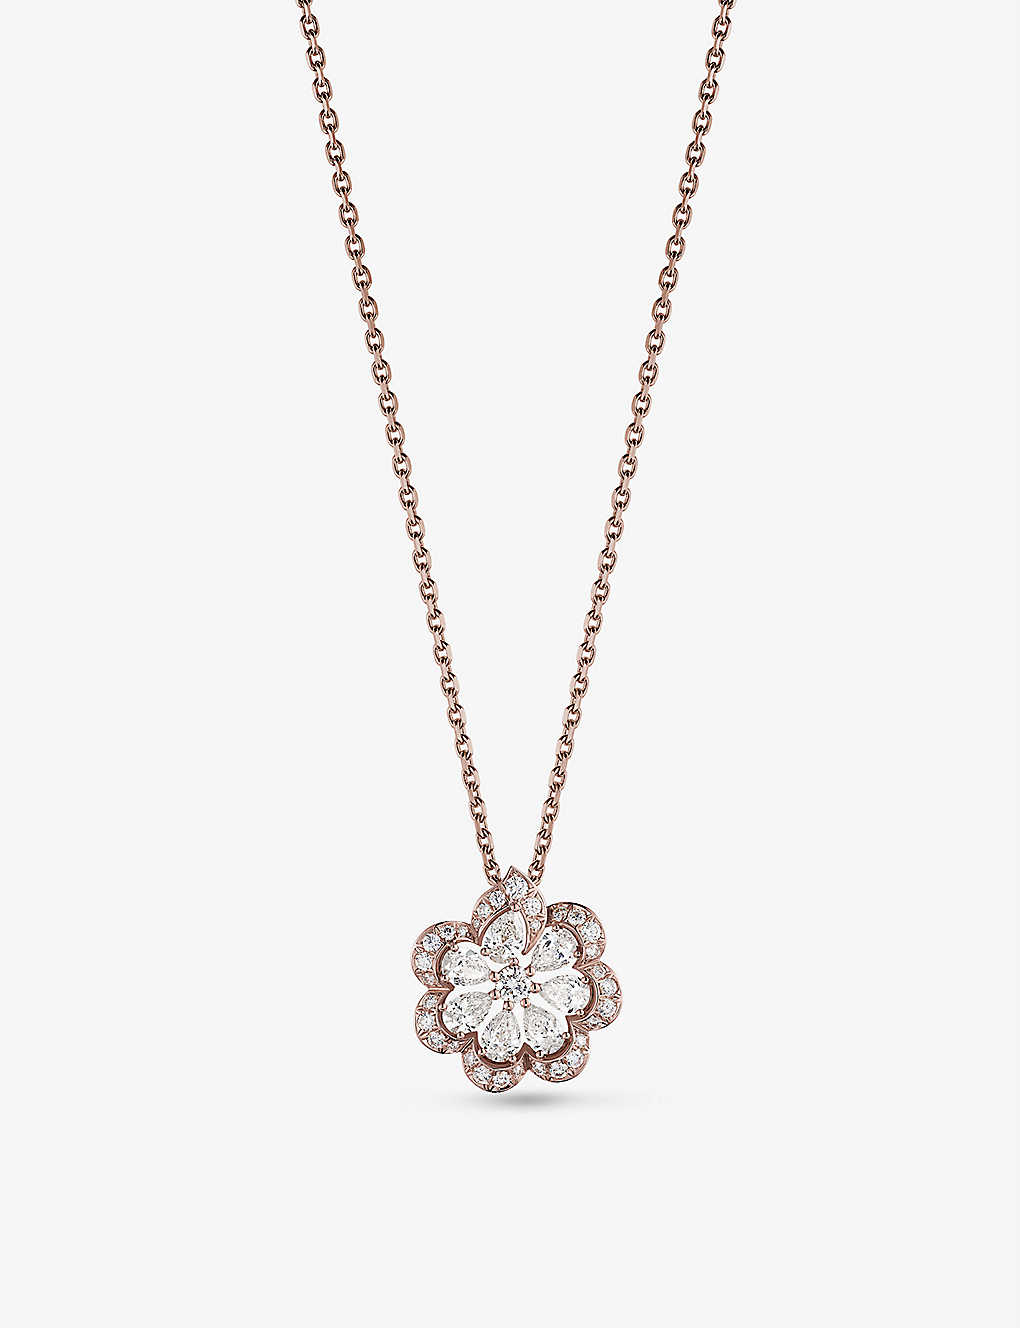 Chopard Precious Lace Frou-frou 18ct Rose-gold And 1.04ct Round-cut Diamond Pendant Necklace In Ethical Rose Gold